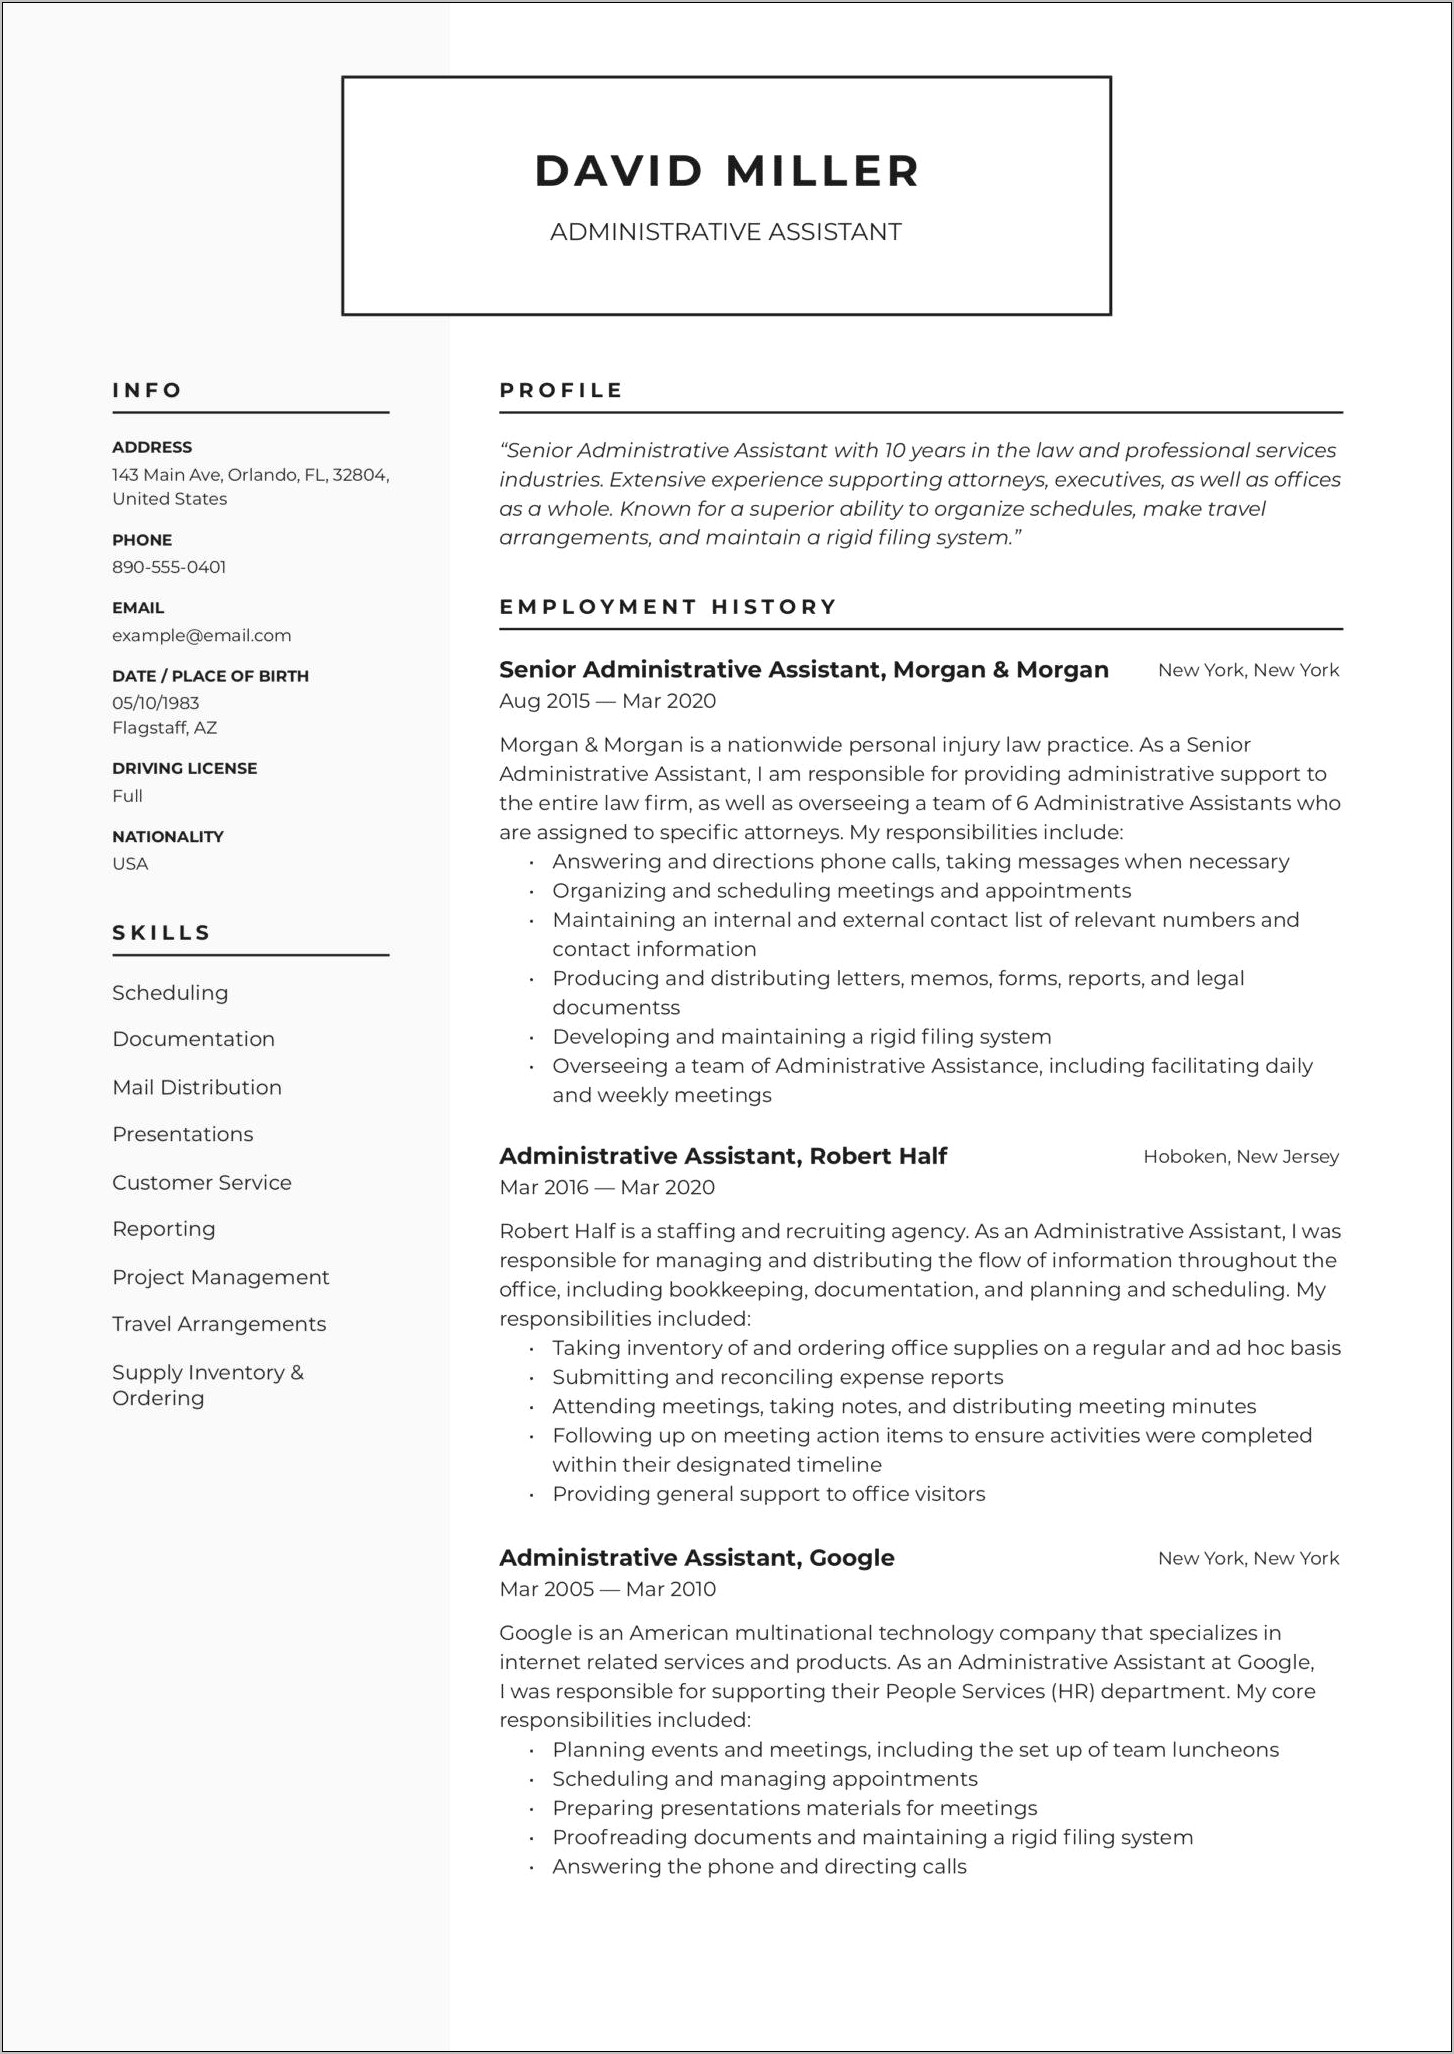 Sample Chronological Resume For Administrative Assistant